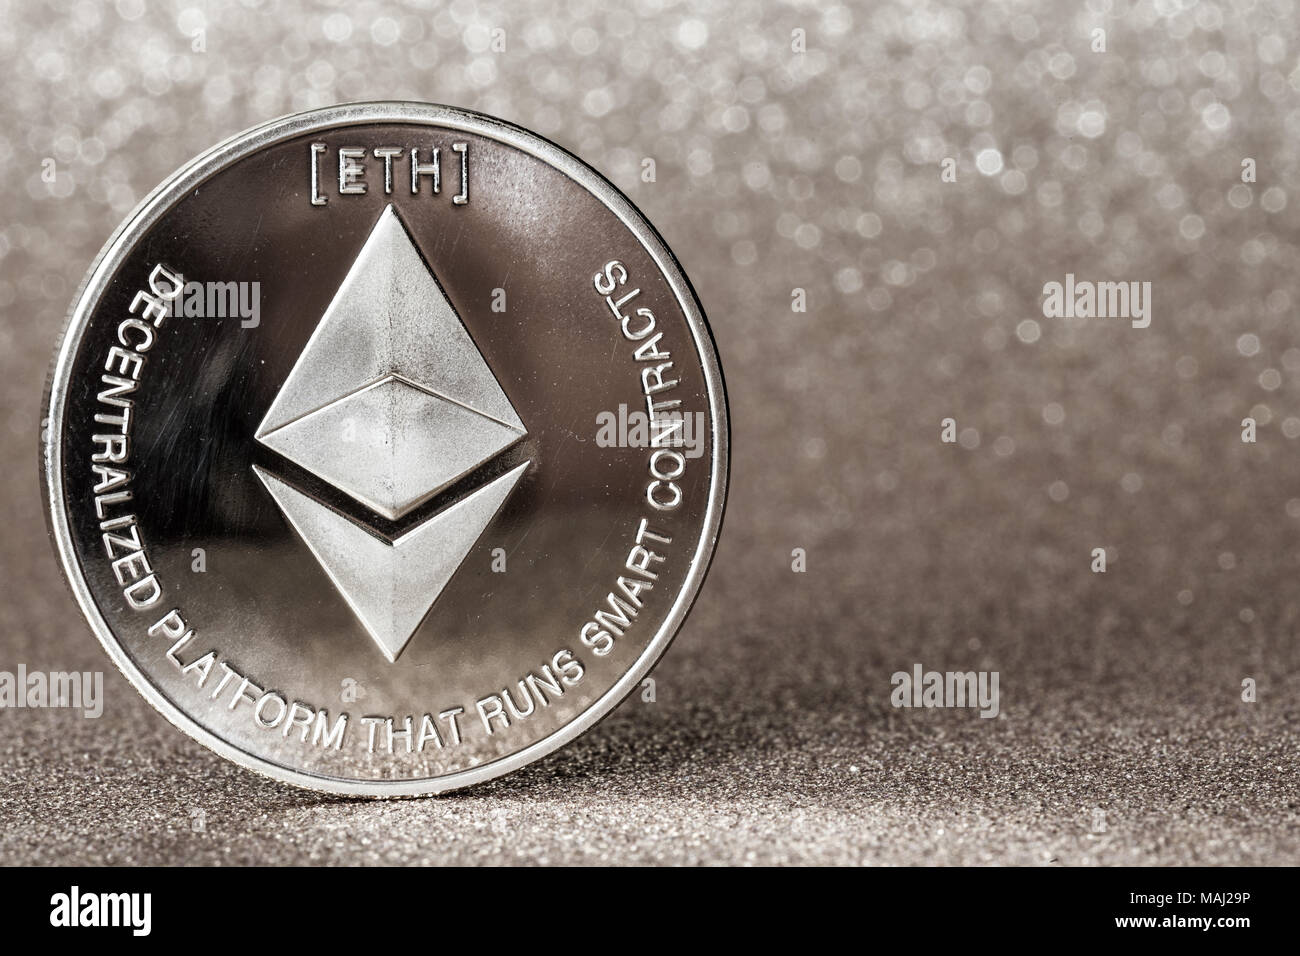 Ethereum  cryptocurrency on silver glitter background Stock Photo